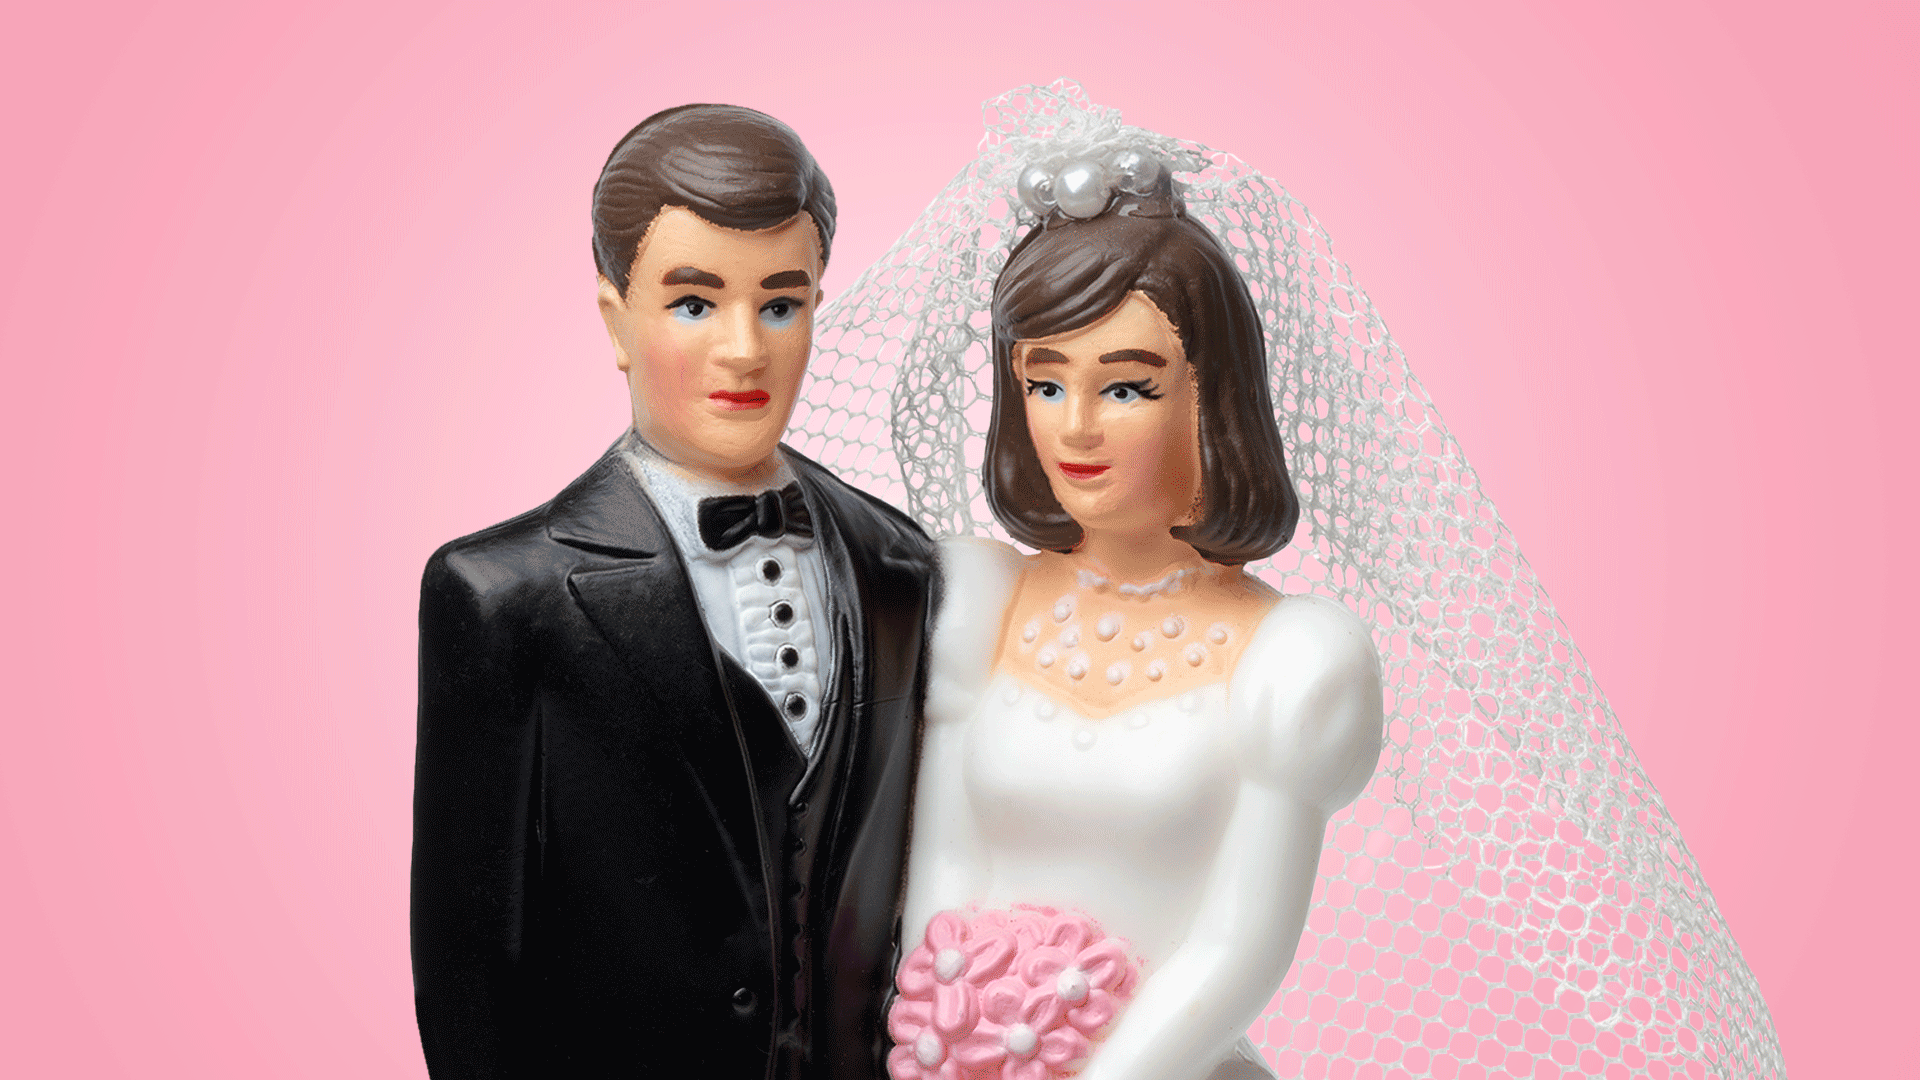 Illustration of a wedding cake topper couple with eyes shifting from side to side